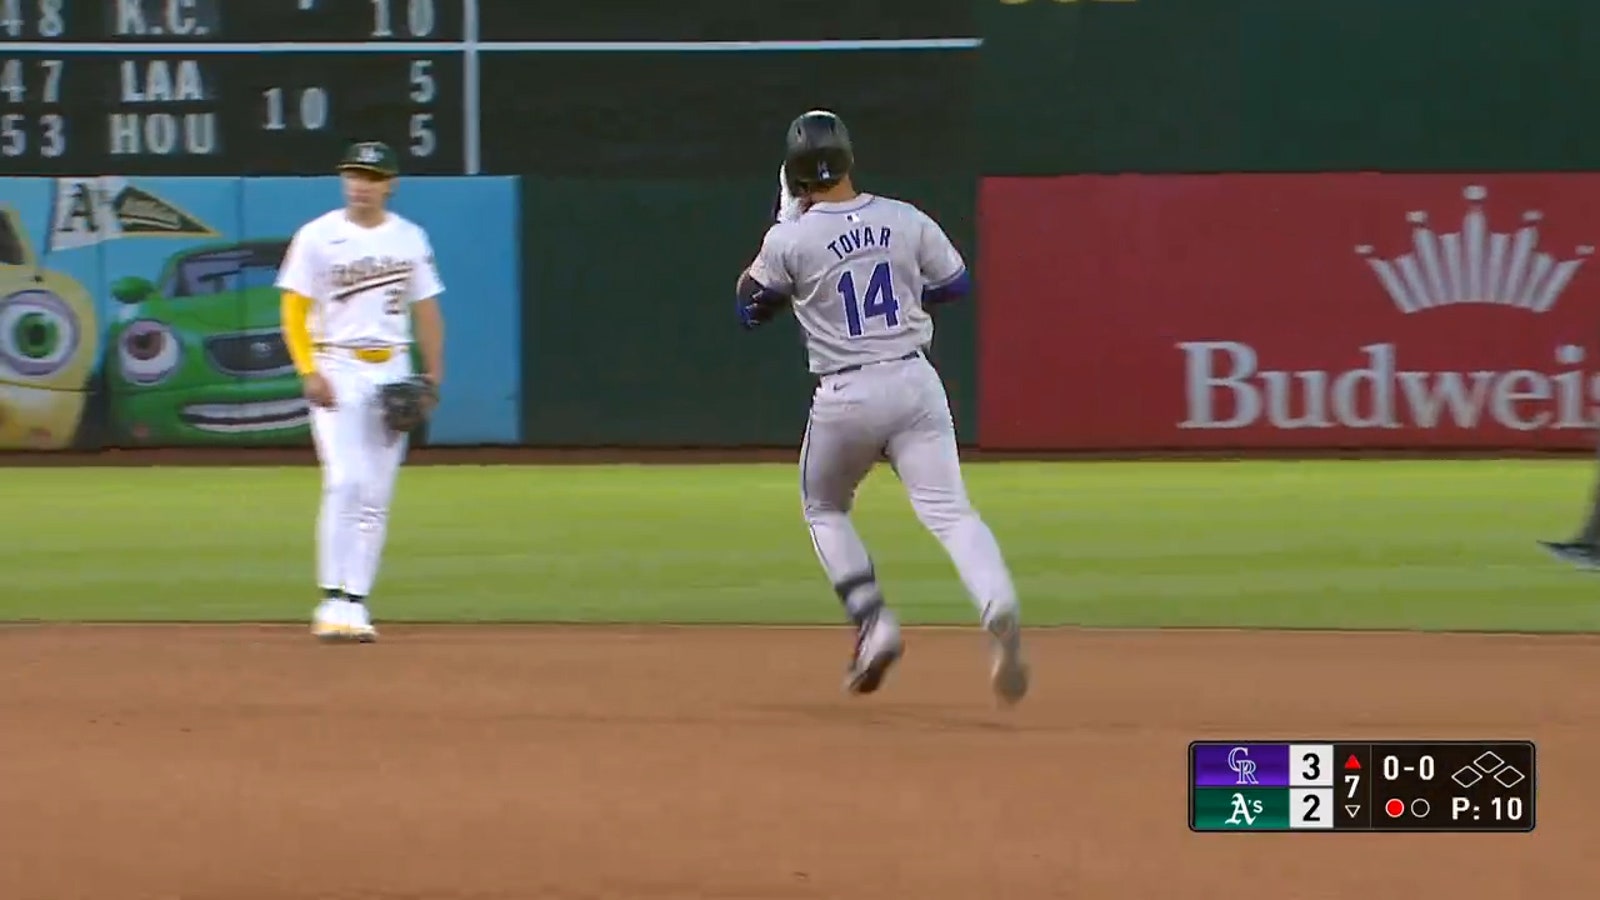 Ezequiel Tovar blasts his second home run of the game to extend the Rockies' lead over the Athletics